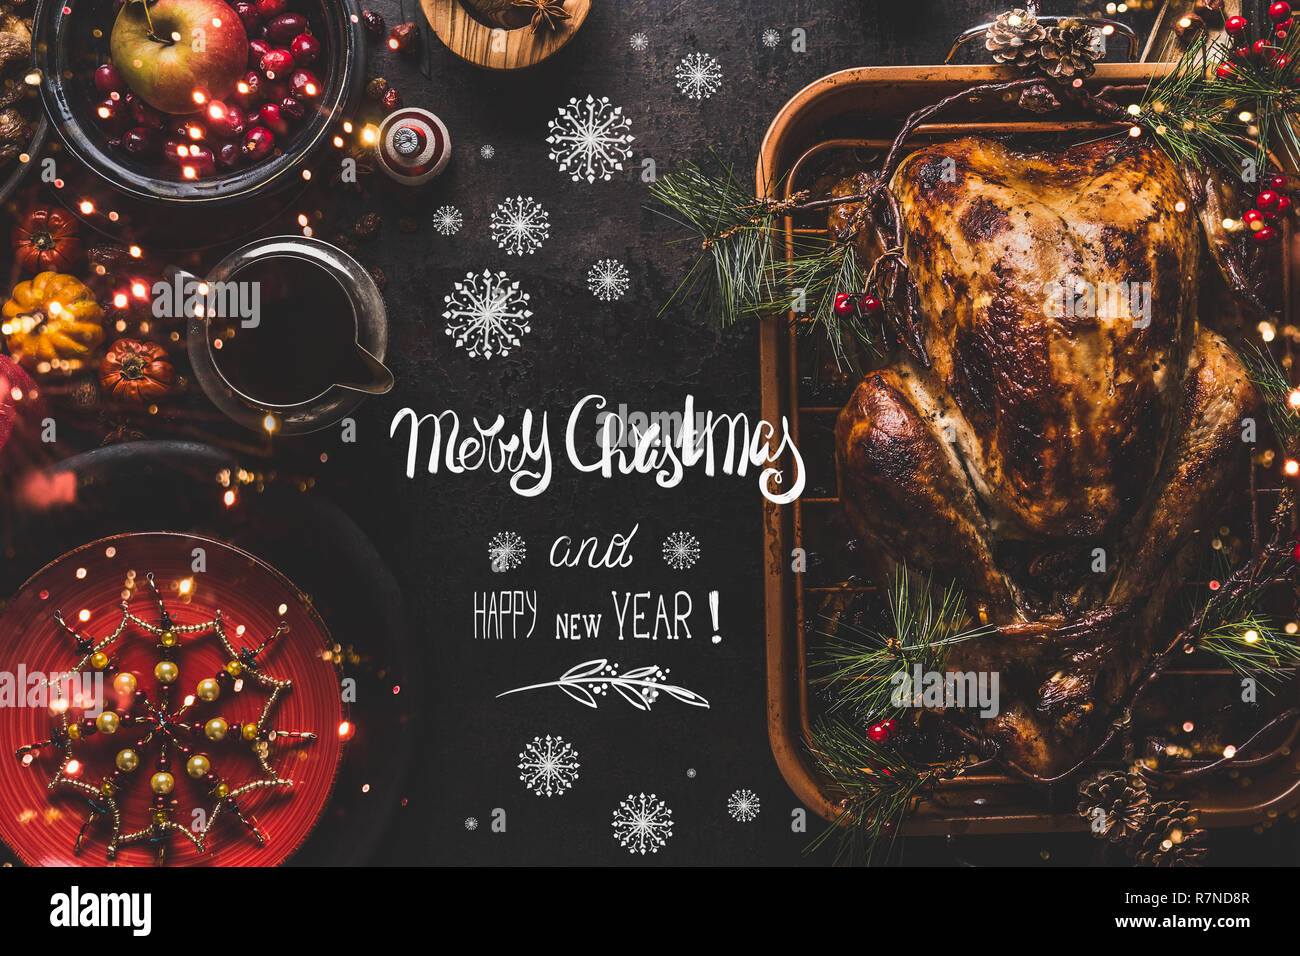 Merry Christmas and Happy New Year greeting text lettering on Christmas dinner table with whole roasted turkey served with sauce, red plates, cutlery, Stock Photo